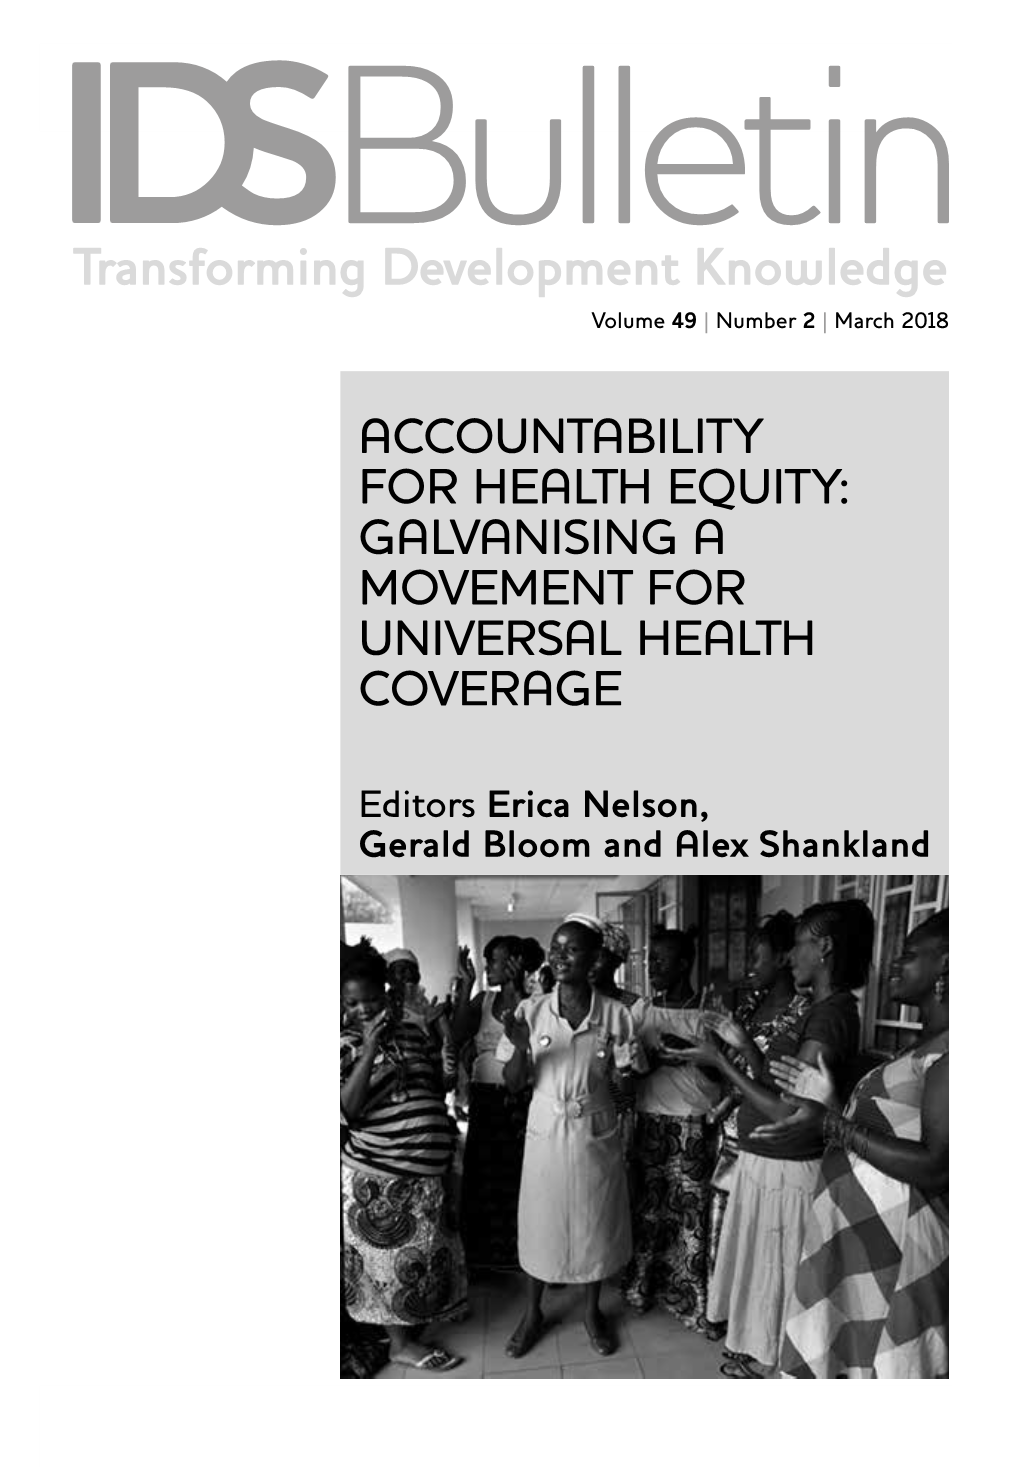 Transforming Development Knowledge Volume 49 | Number 2 | March 2018